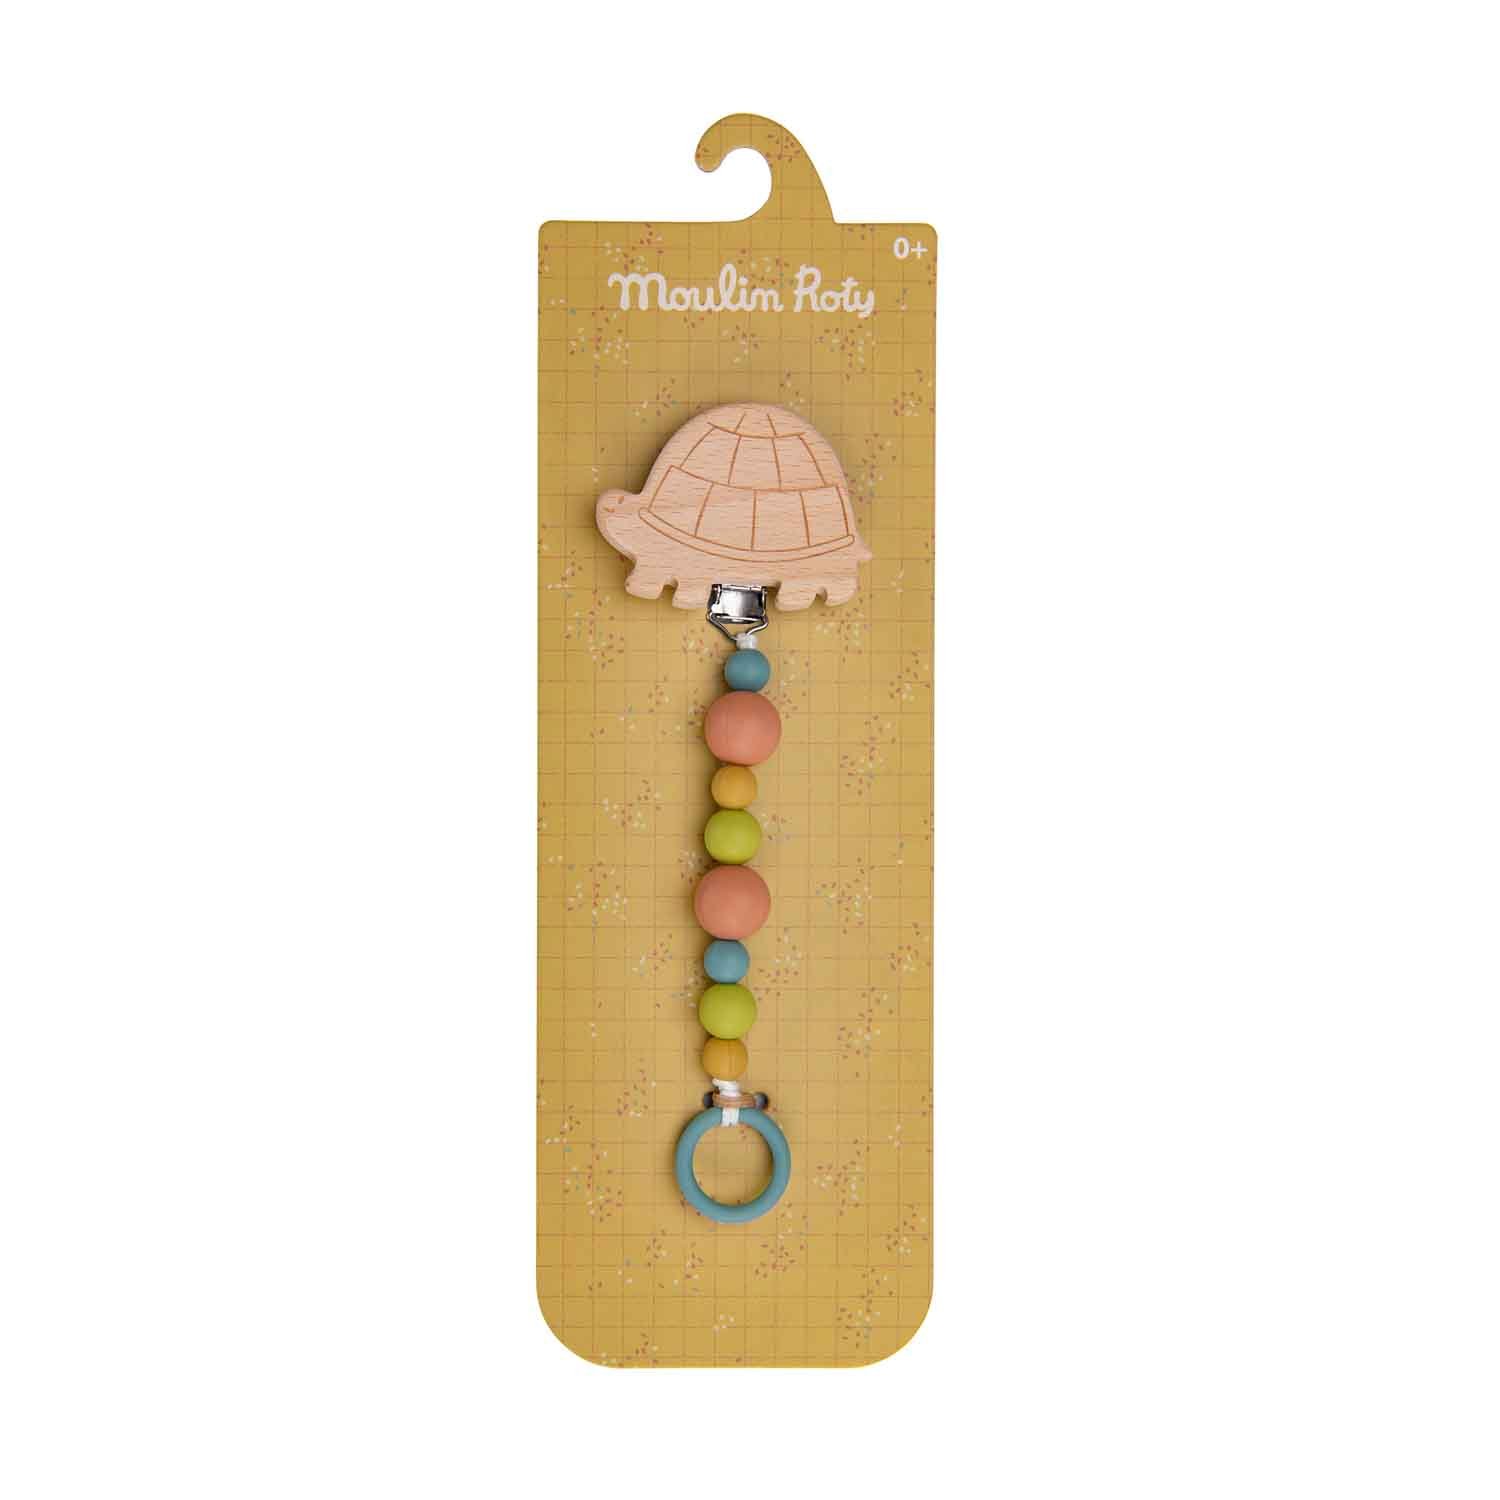 MOULIN ROTY - Attache-tétine bois et silicone tortue MULTICOLORE Moulin Roty